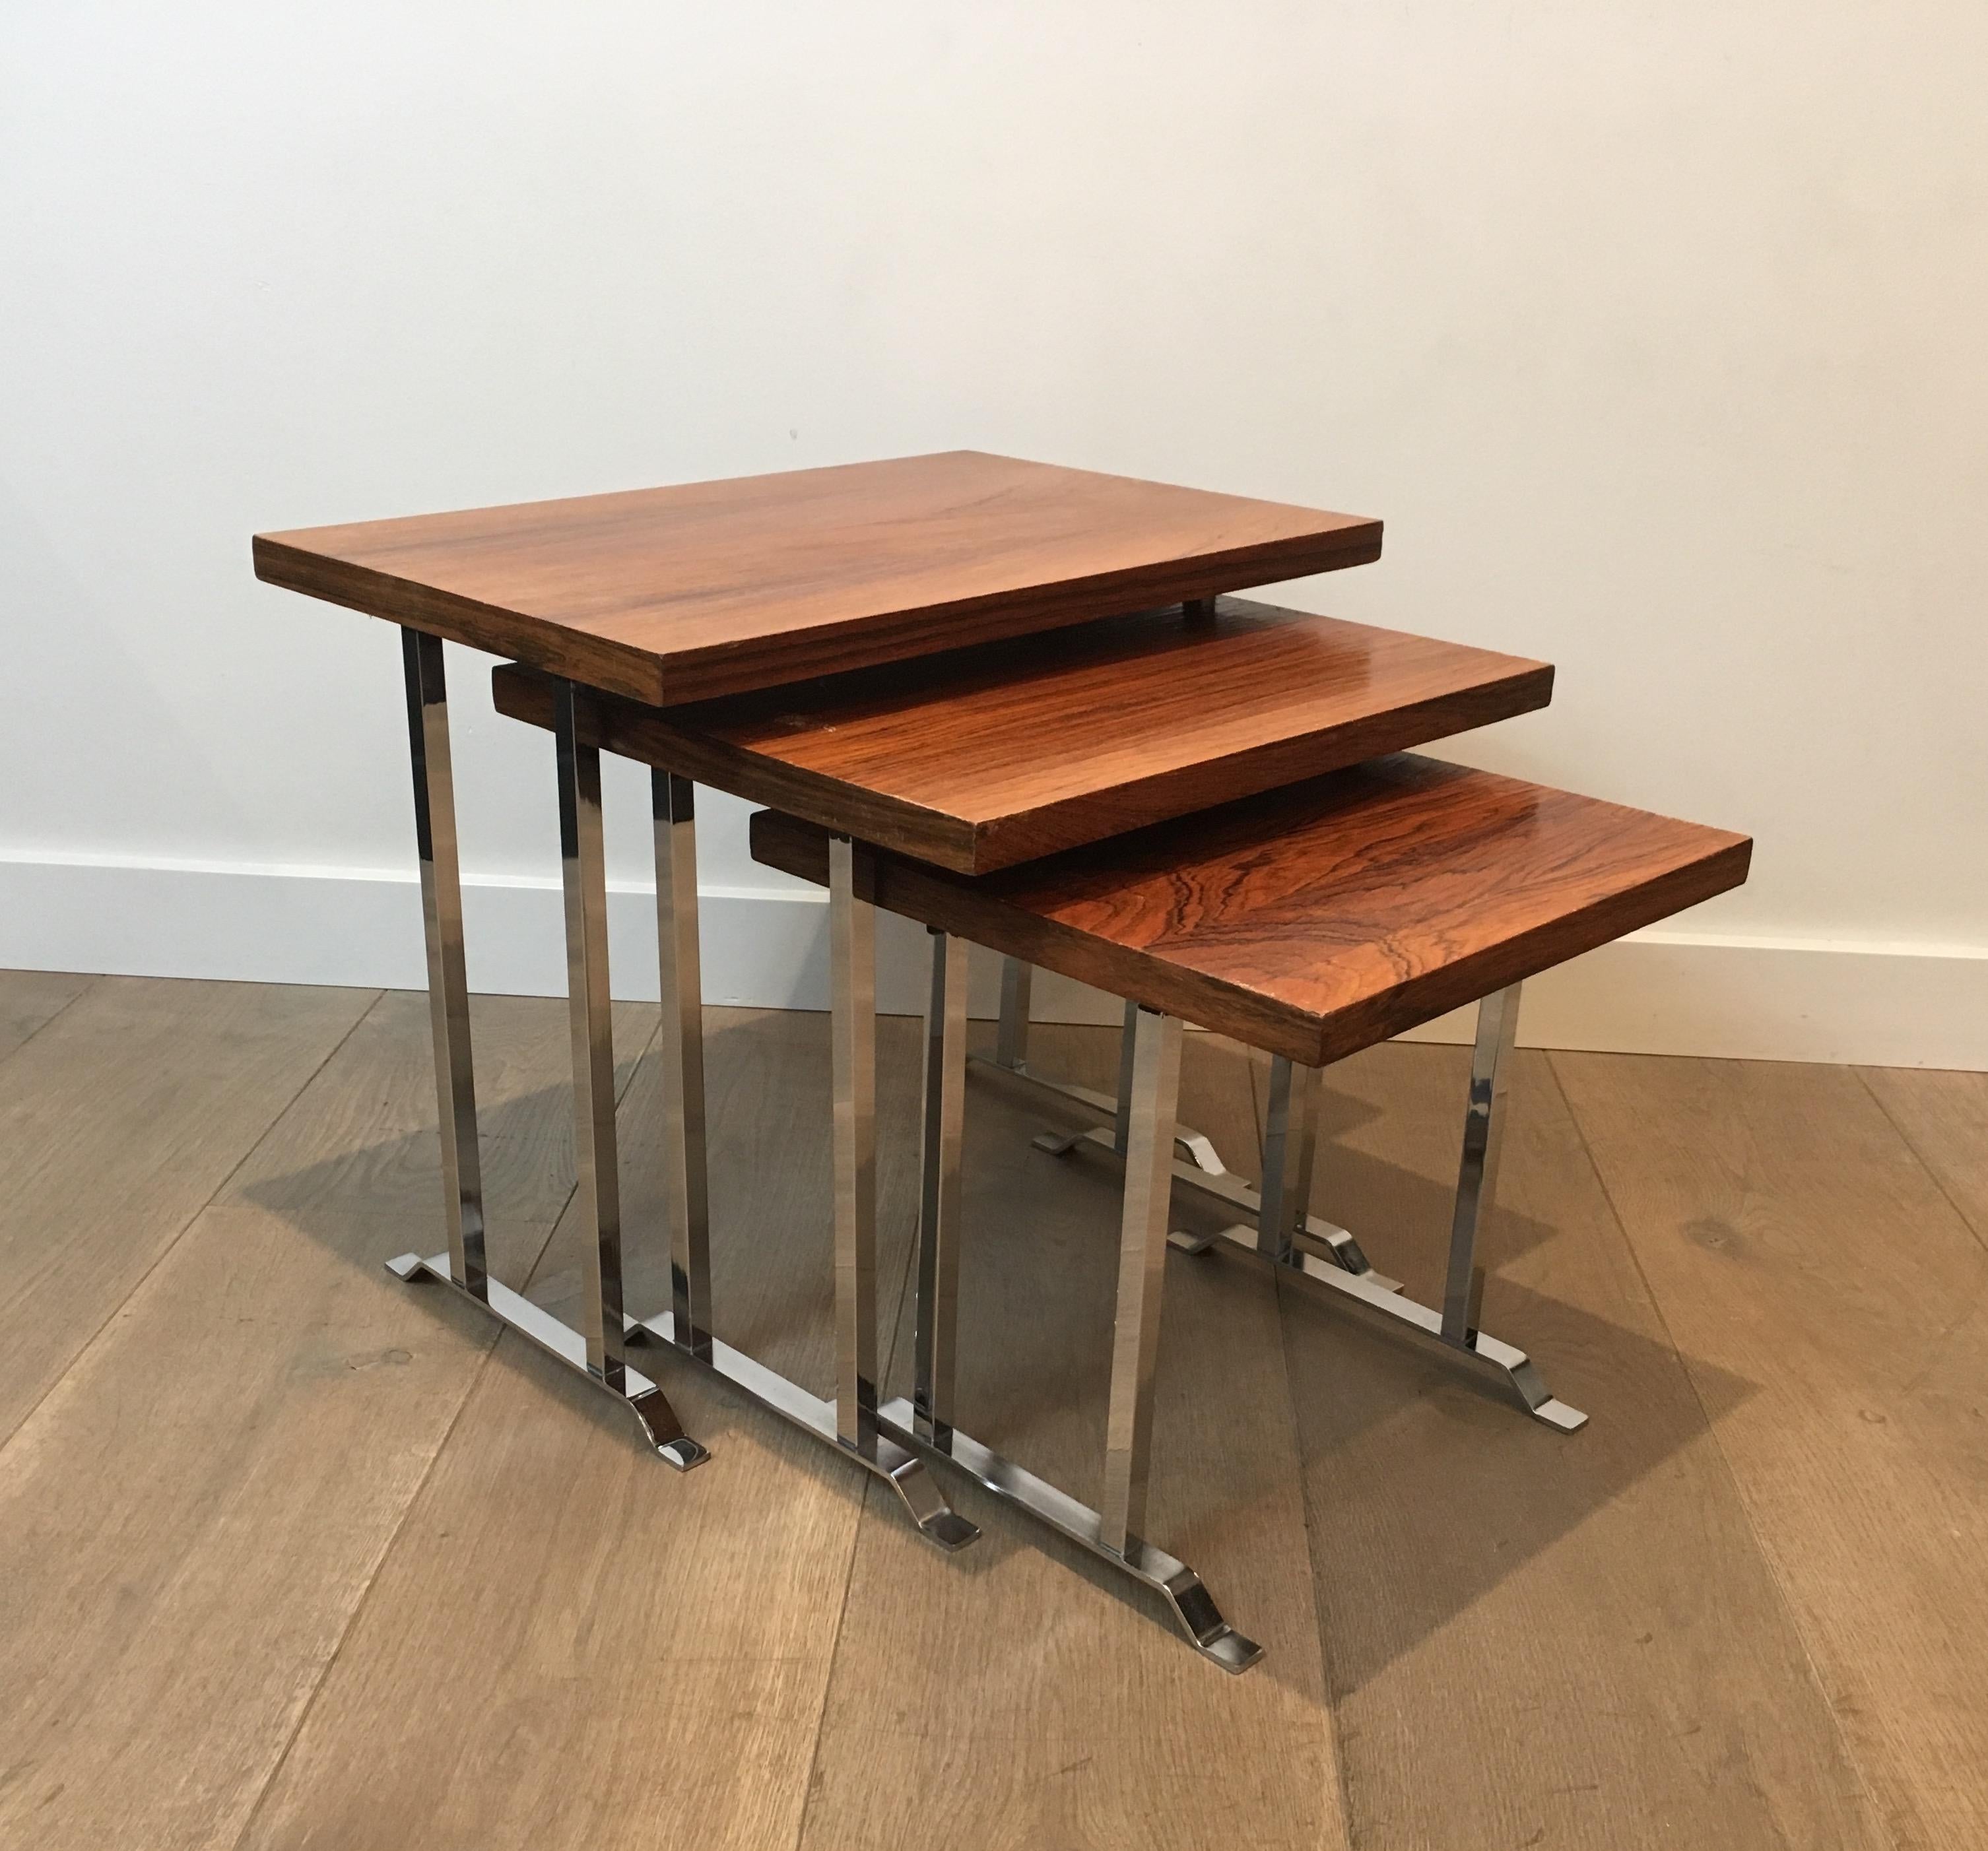 Set of 3 Exotic Wood and Chrome Nesting Tables, French, circa 1970 For Sale 5